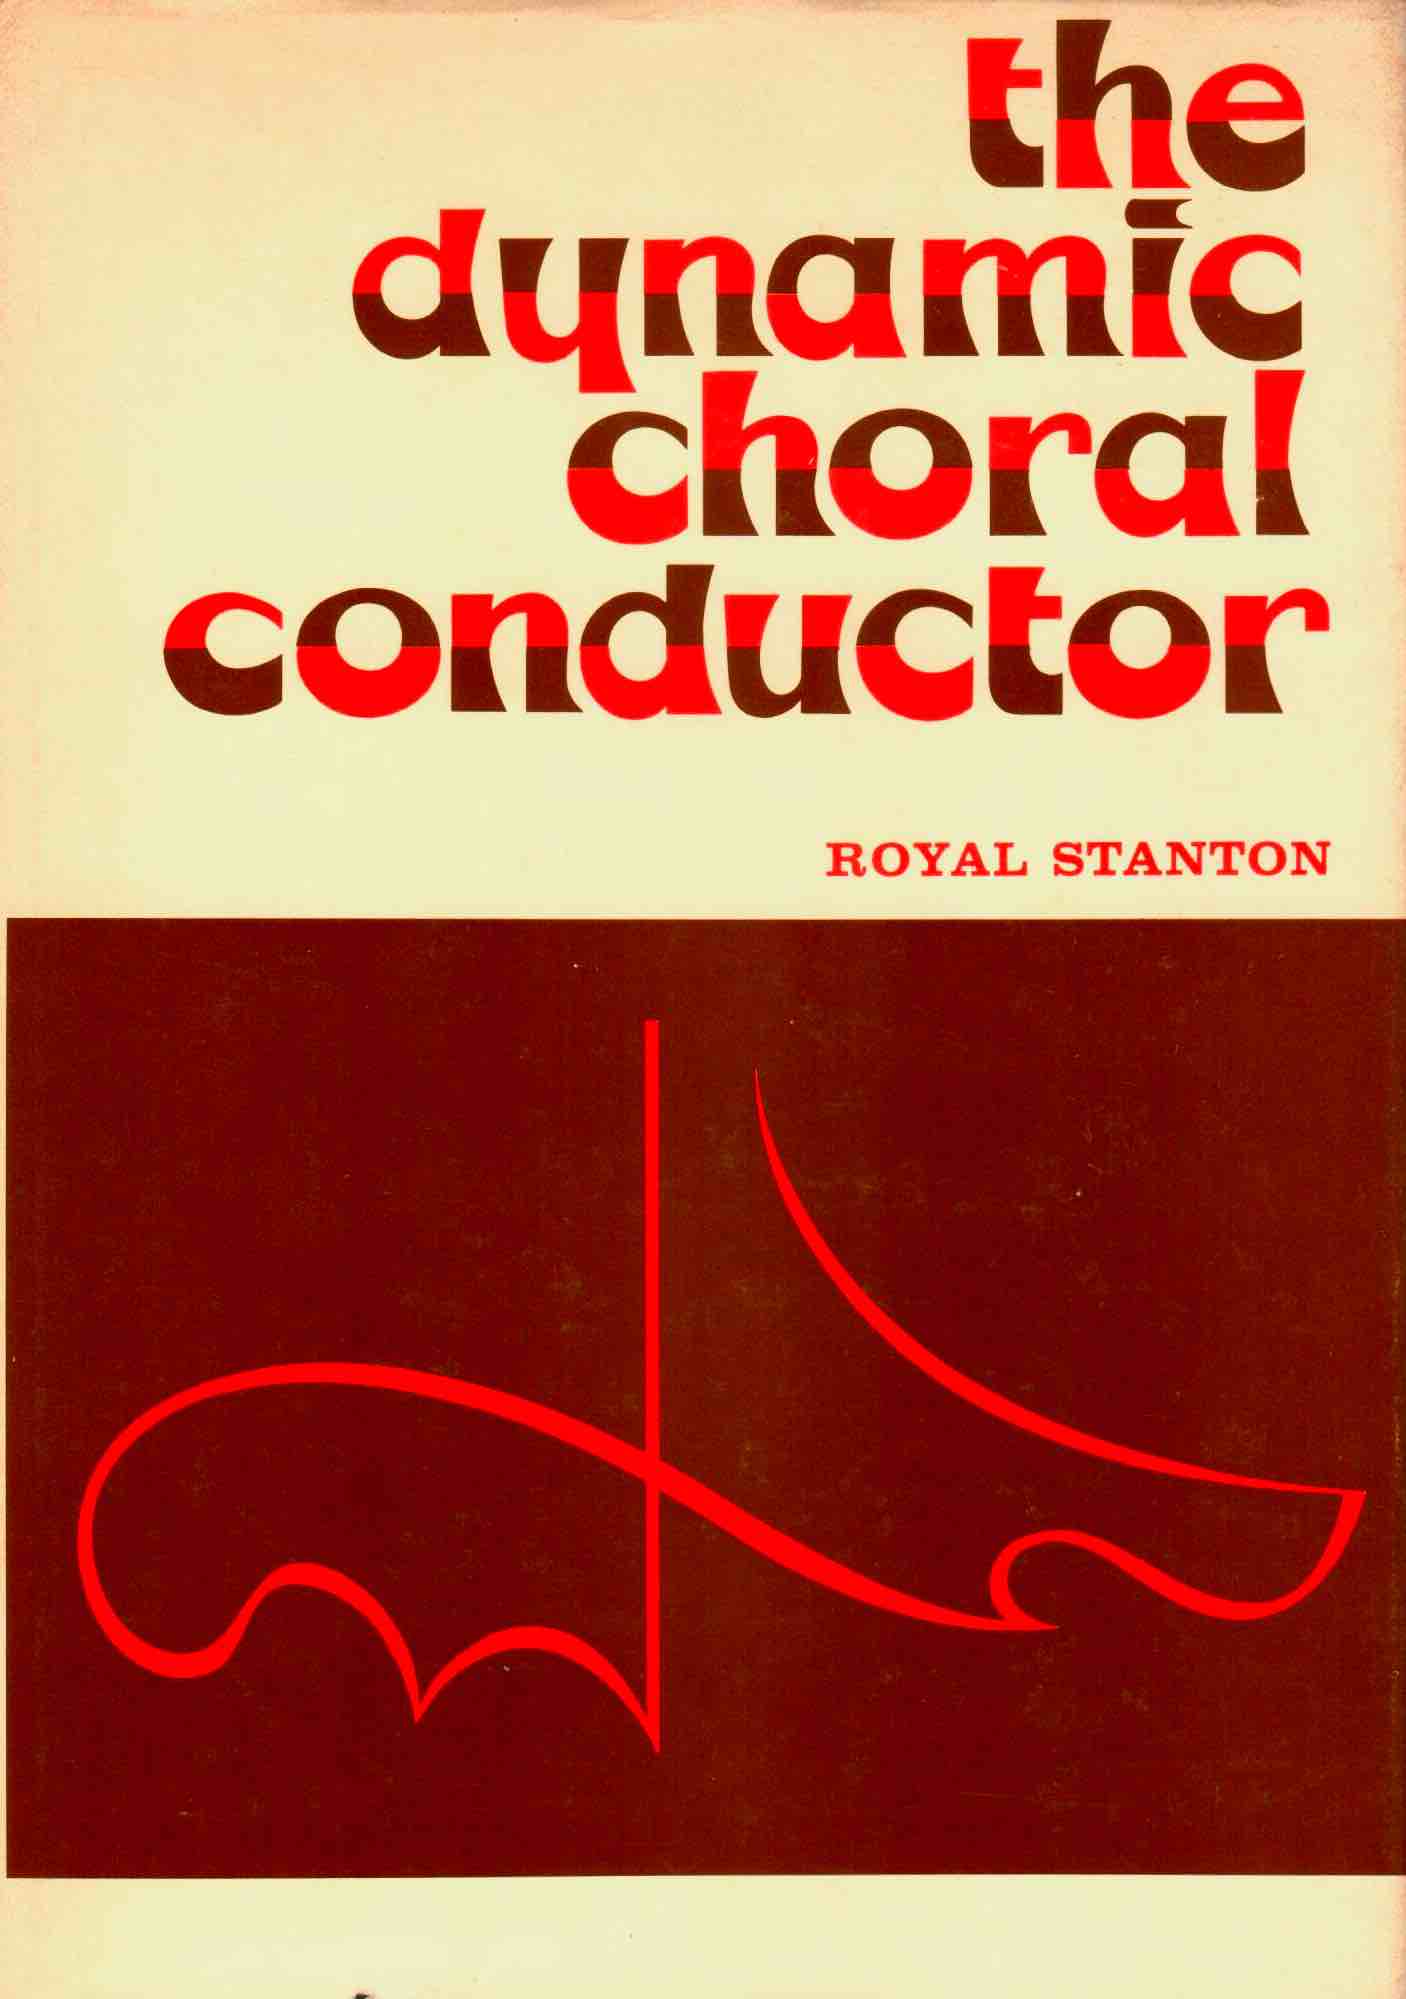 Cover of The Dynamic Choral Conductor